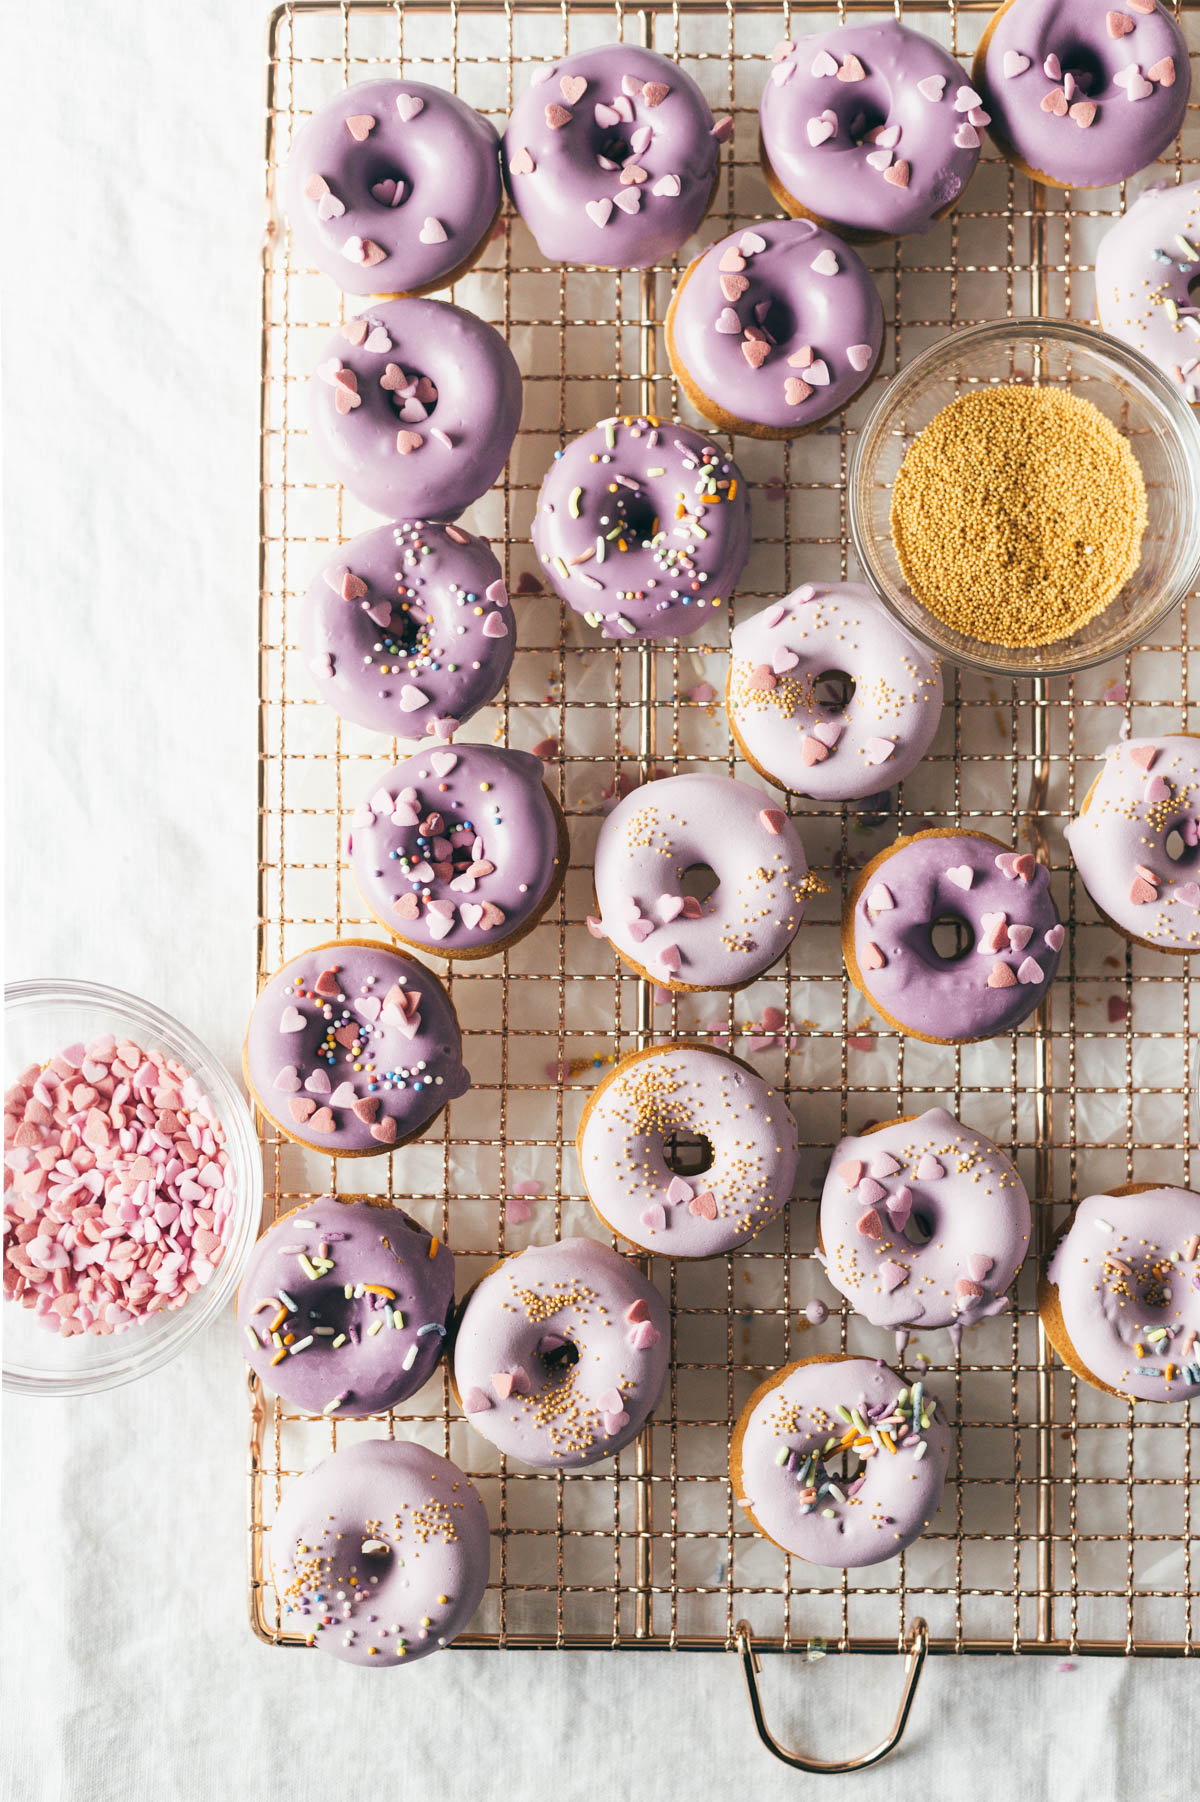 Donuts (for donut maker), A Cup of Sprinkles